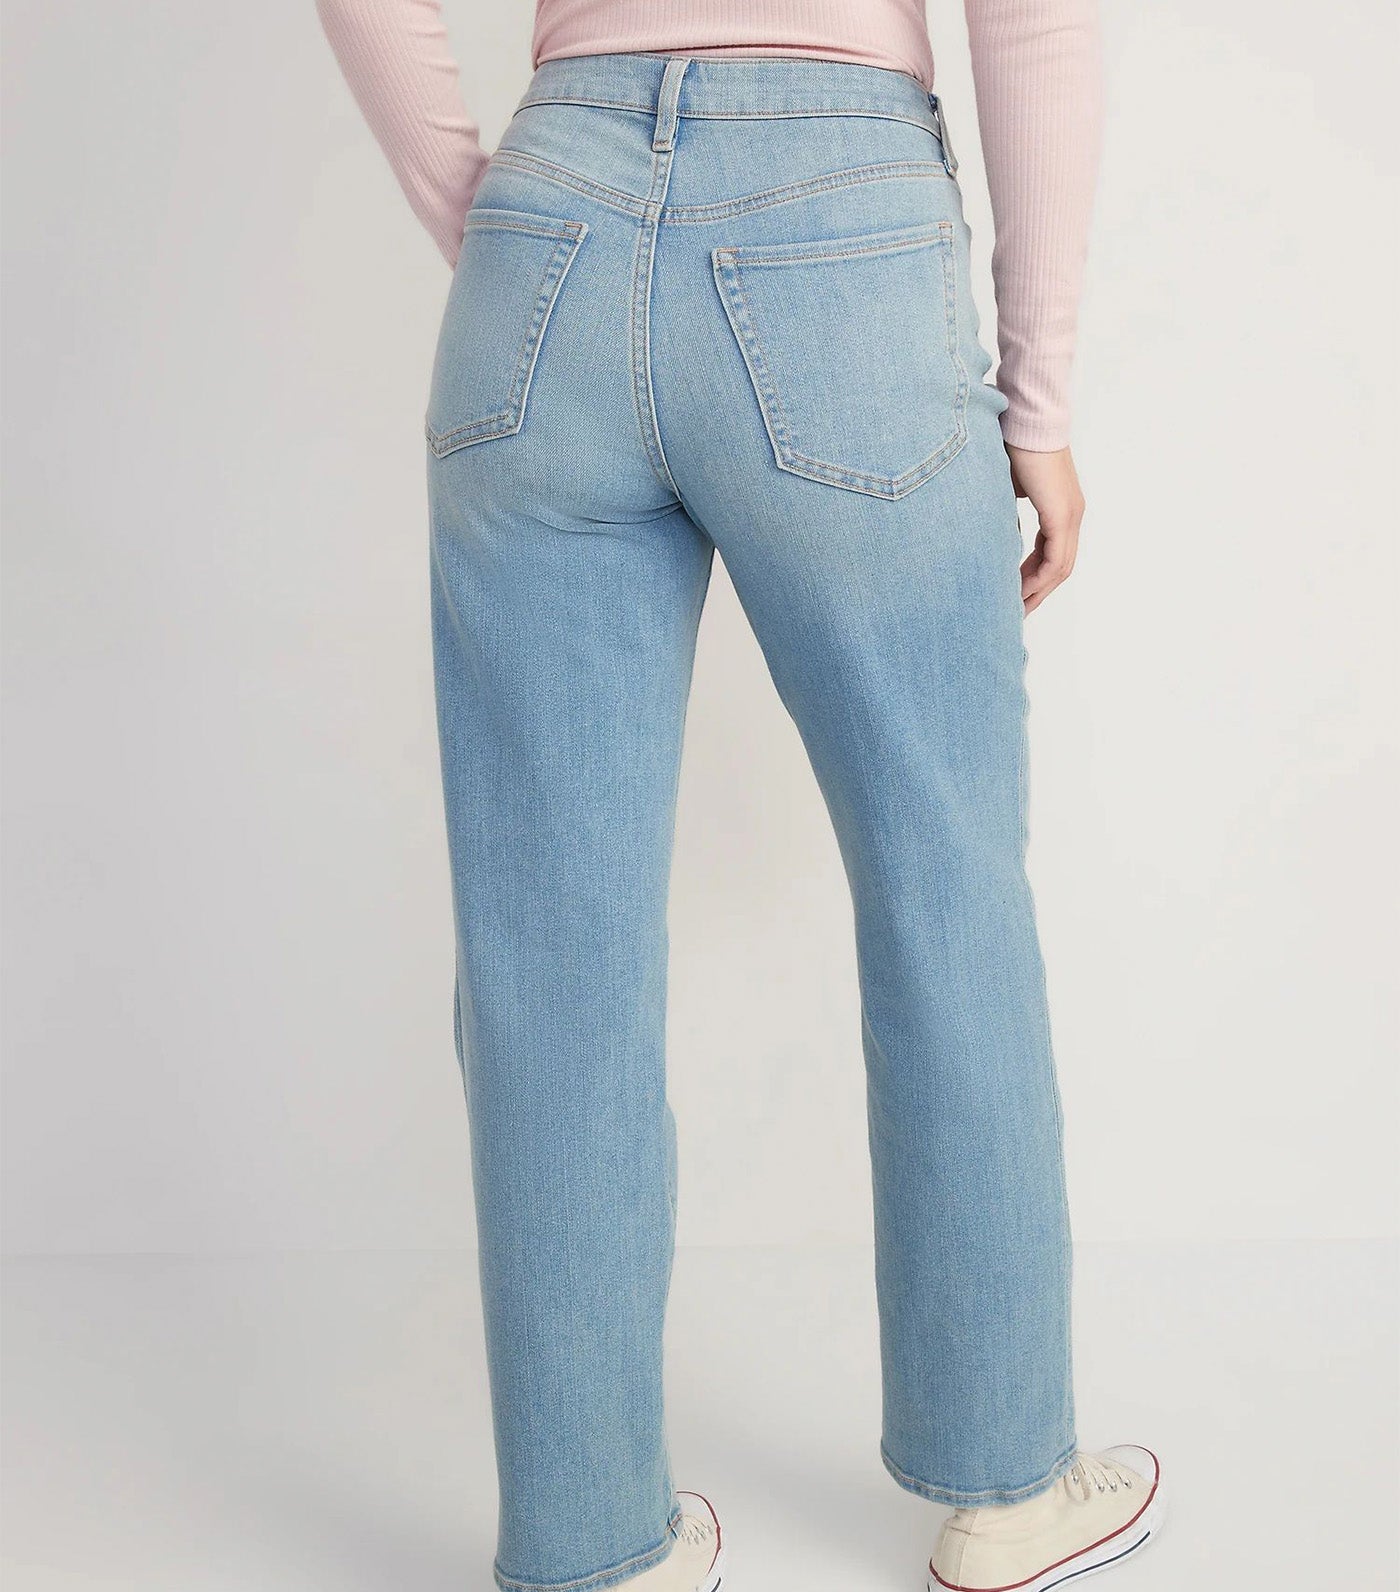 High-Waisted Wow Loose Jeans for Women Santa Catarina